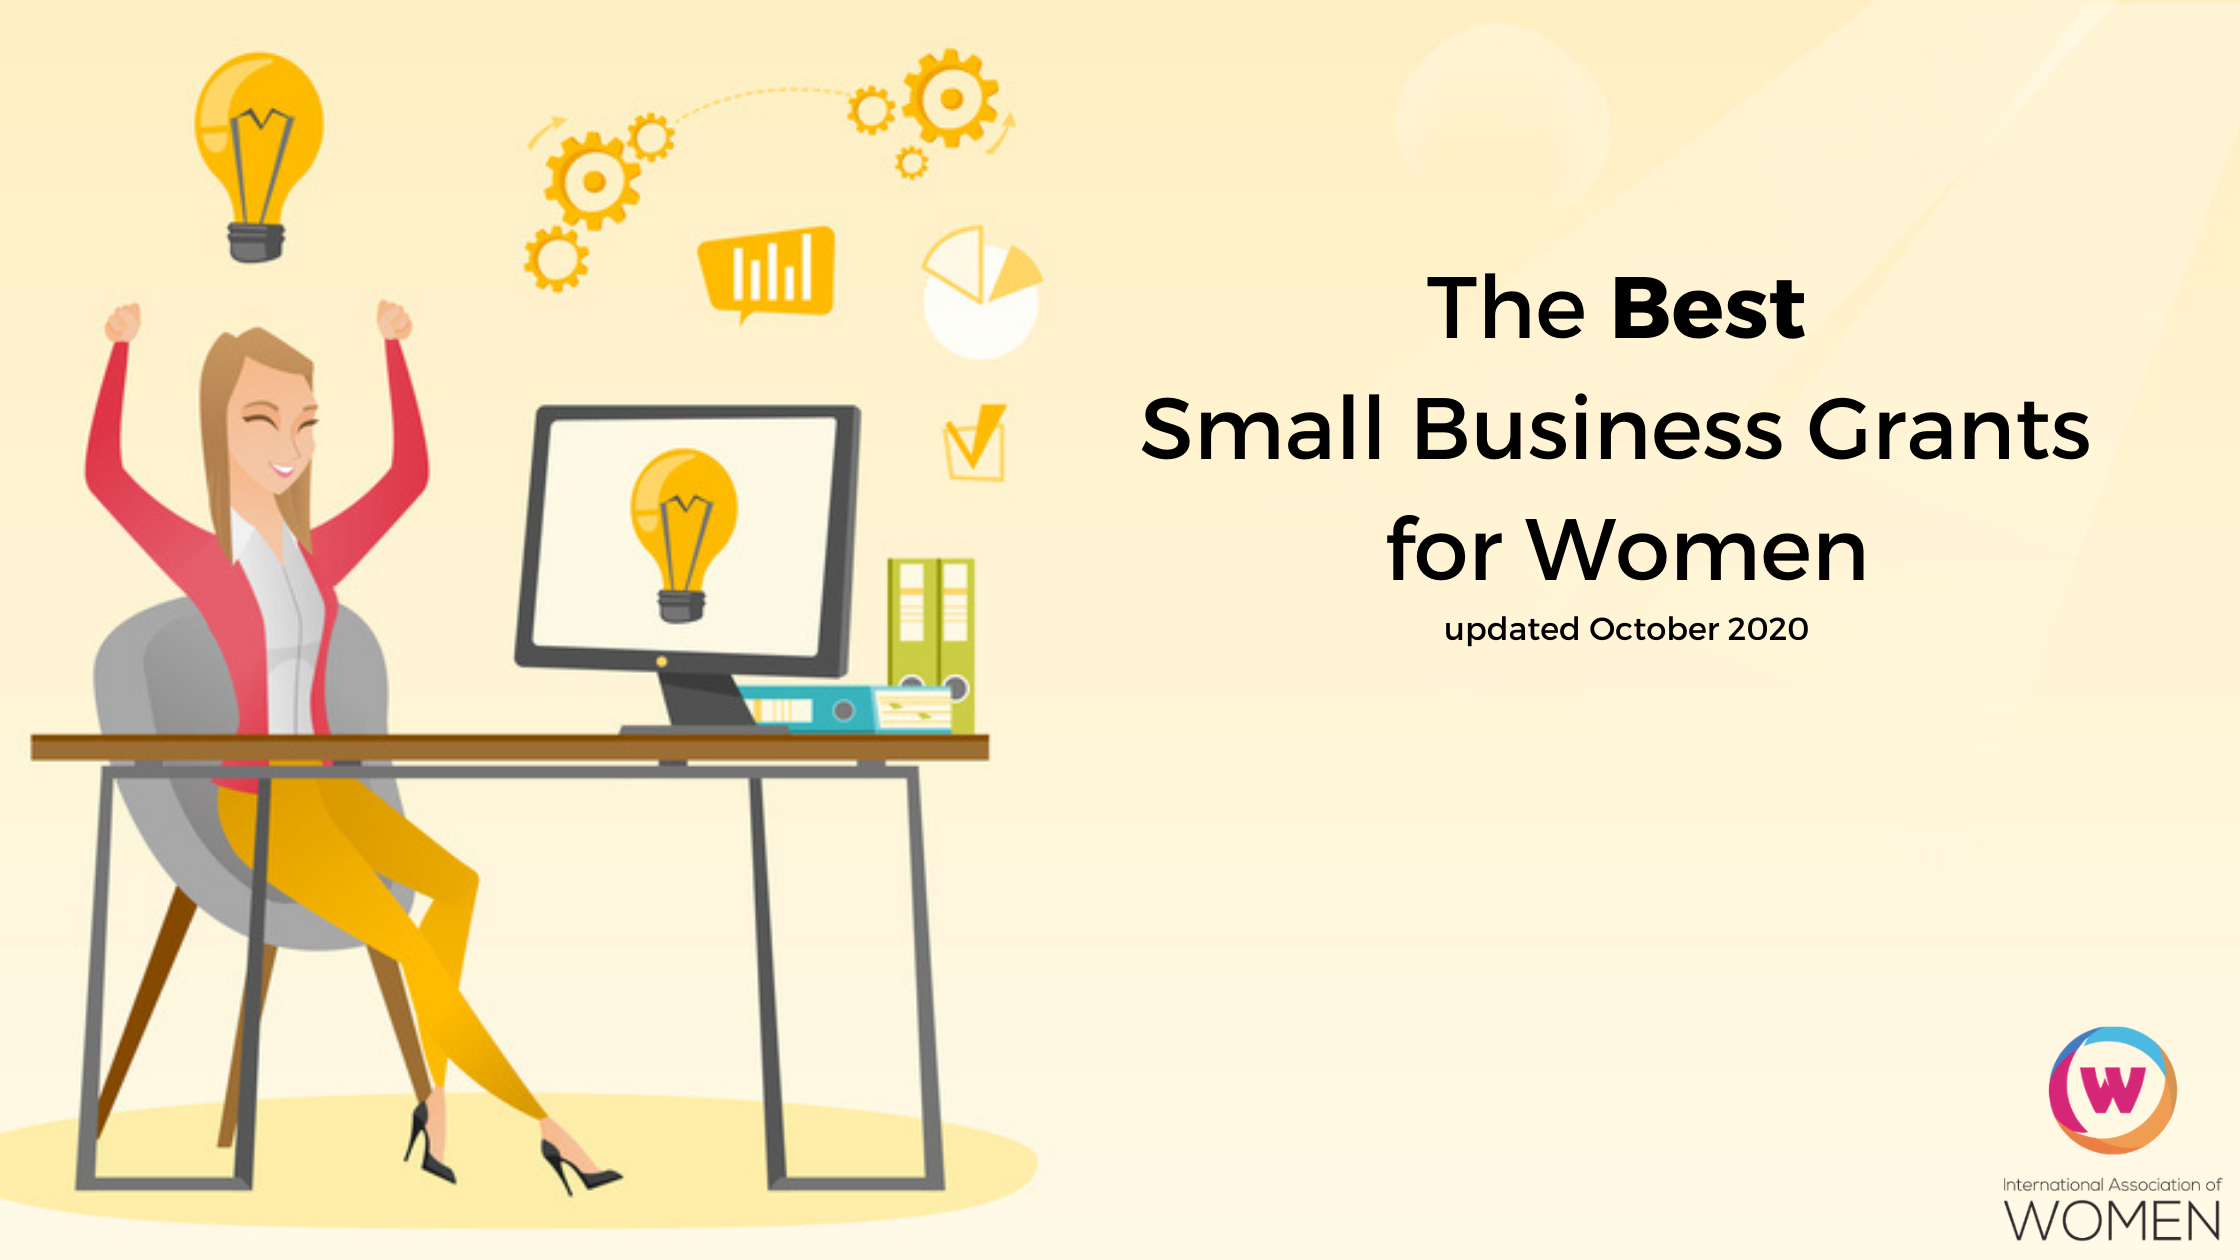 The Best Small Business Grants for Women